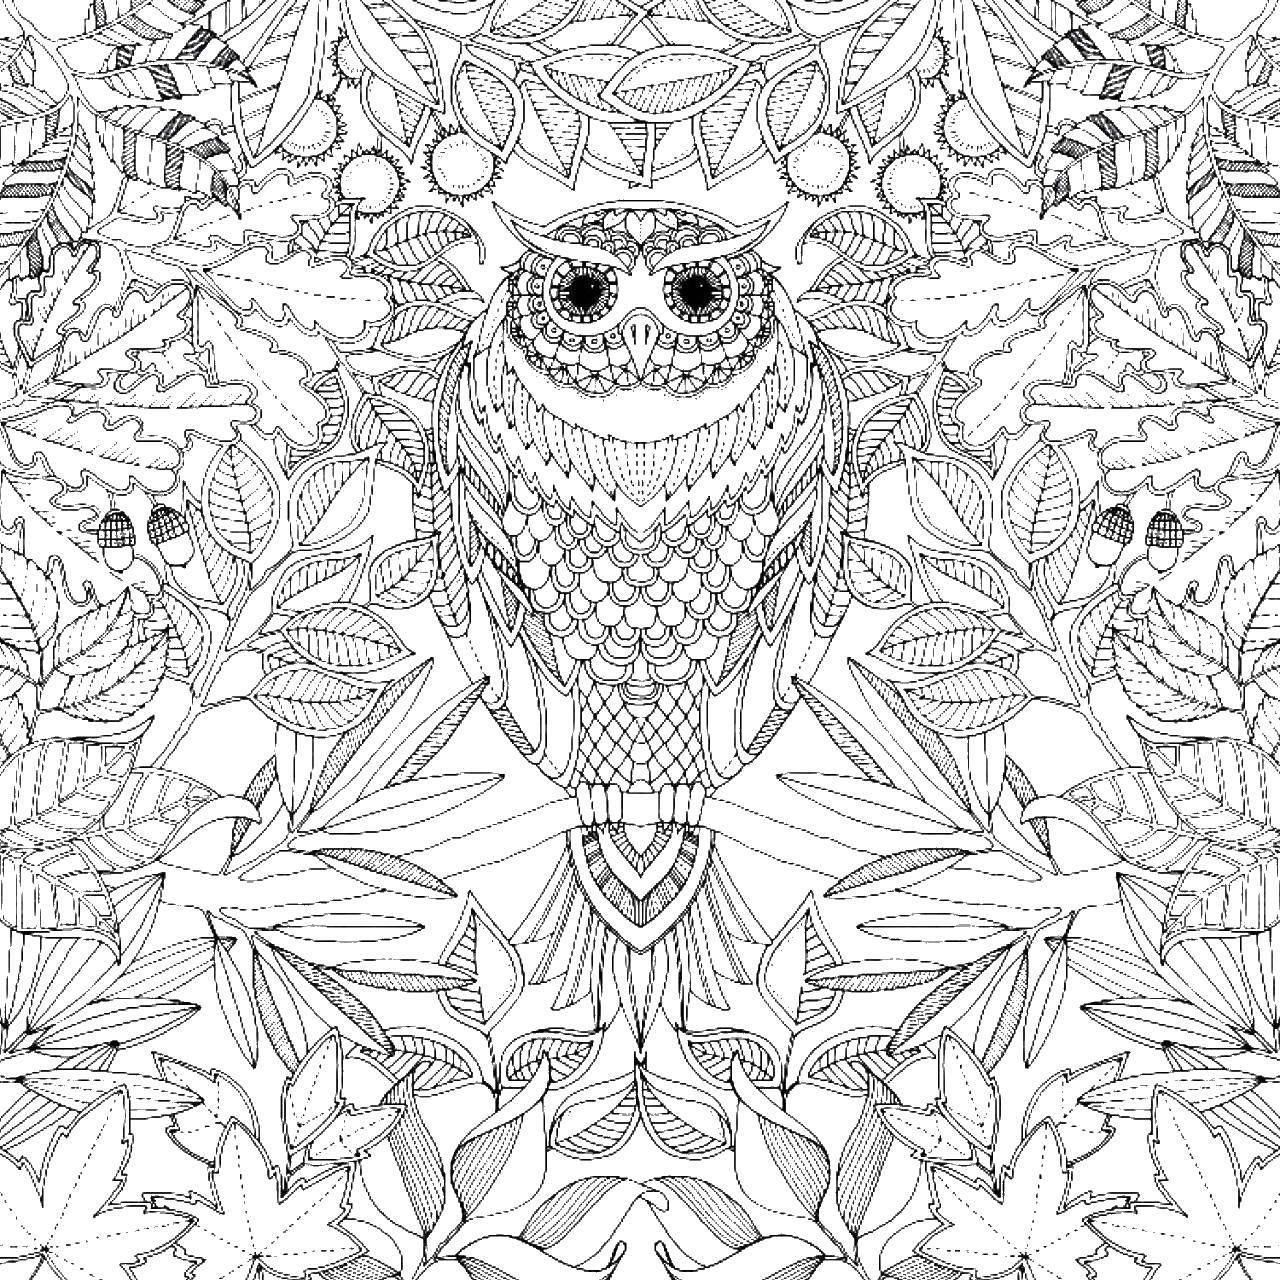 Coloring Owl in the flowers. Category coloring pages for teenagers. Tags:  owl, flowers, patterns.